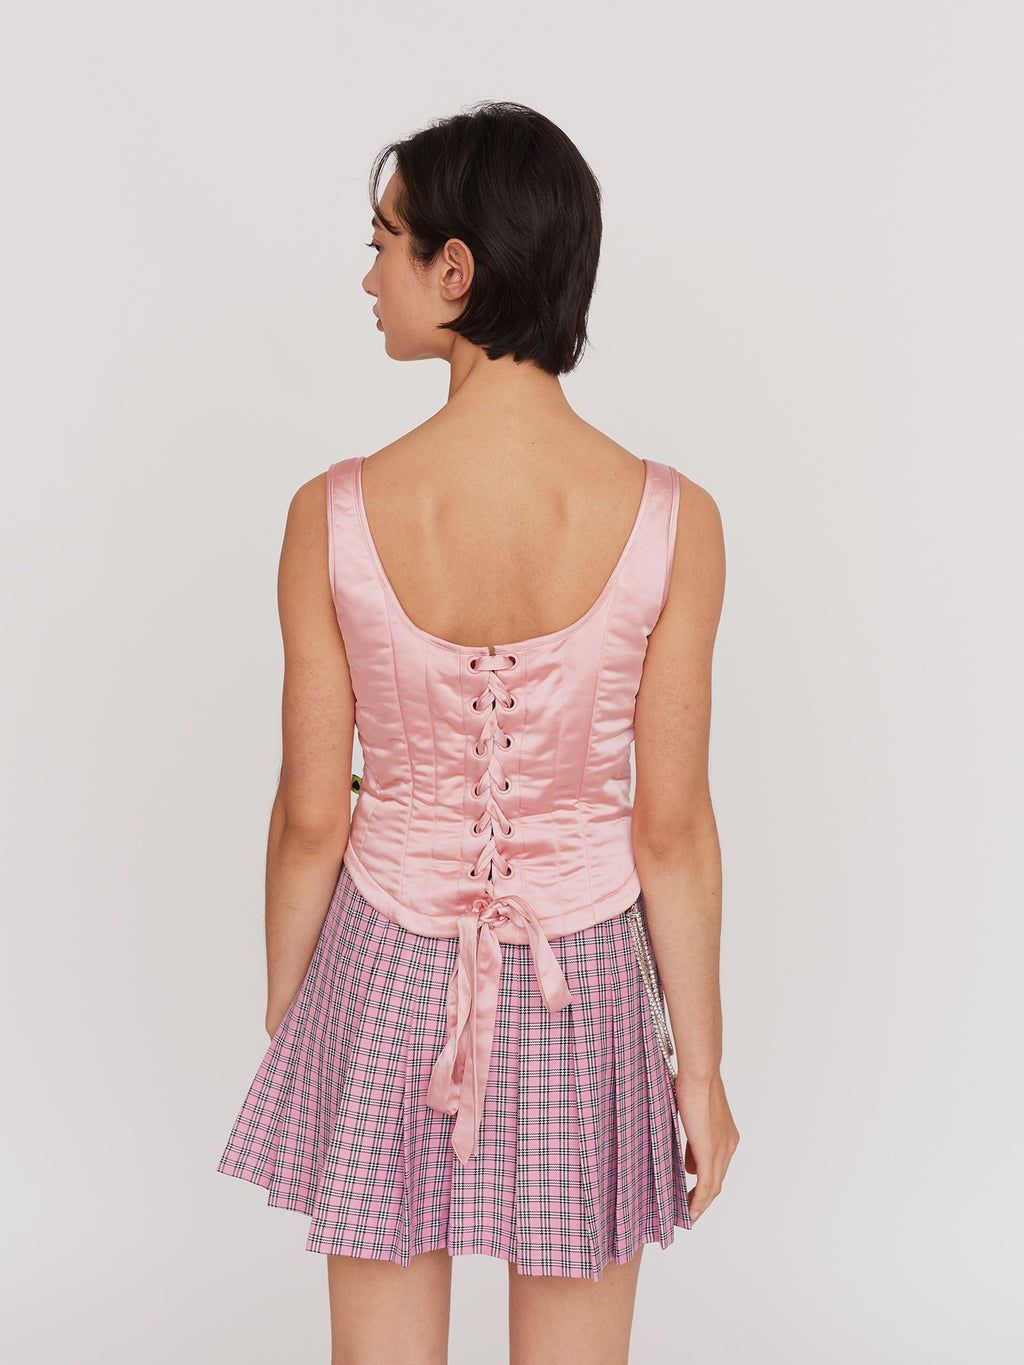 Quilted corset top